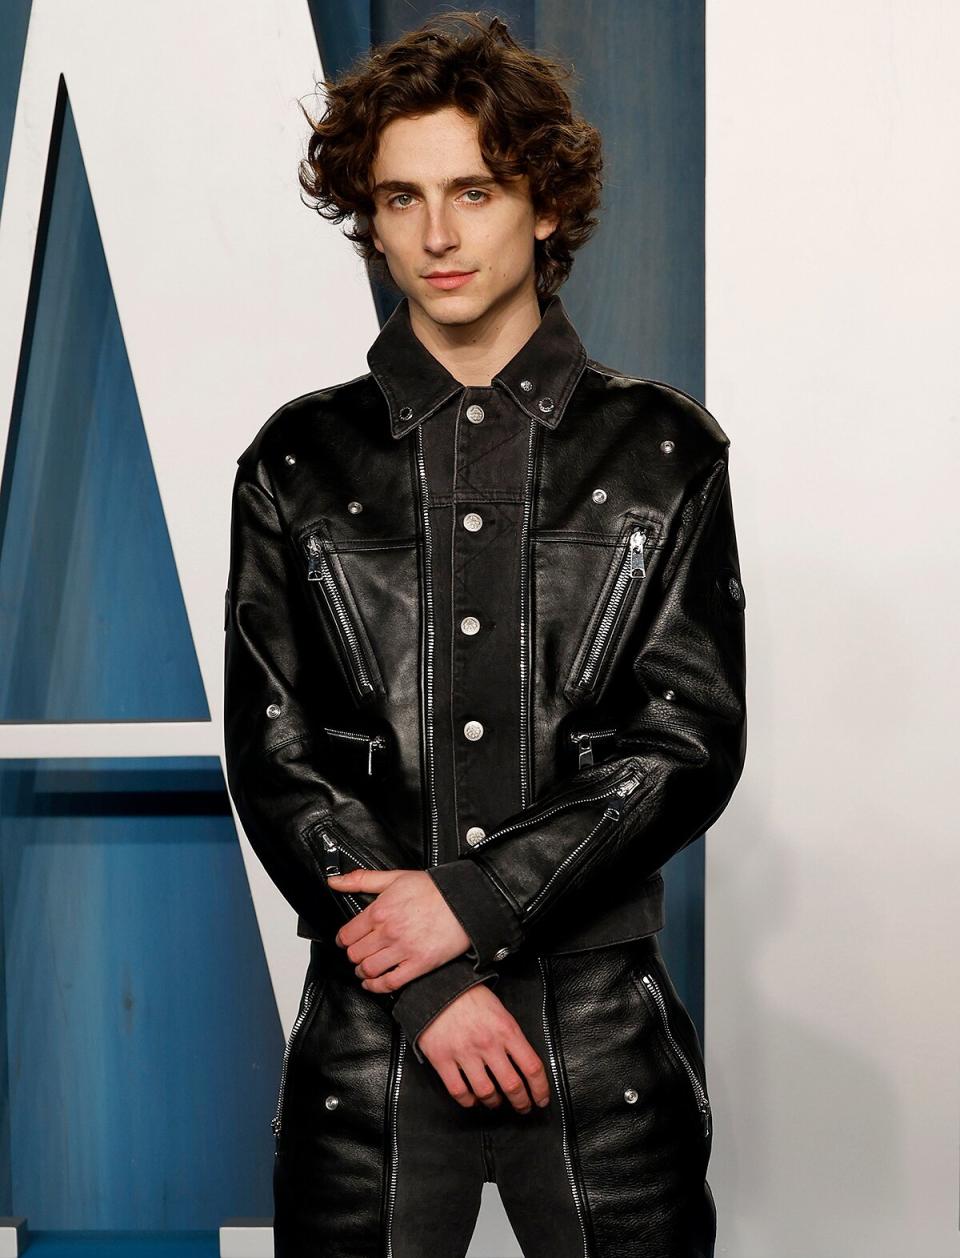 Timothée Chalamet attends the 2022 Vanity Fair Oscar Party hosted by Radhika Jones at Wallis Annenberg Center for the Performing Arts on March 27, 2022